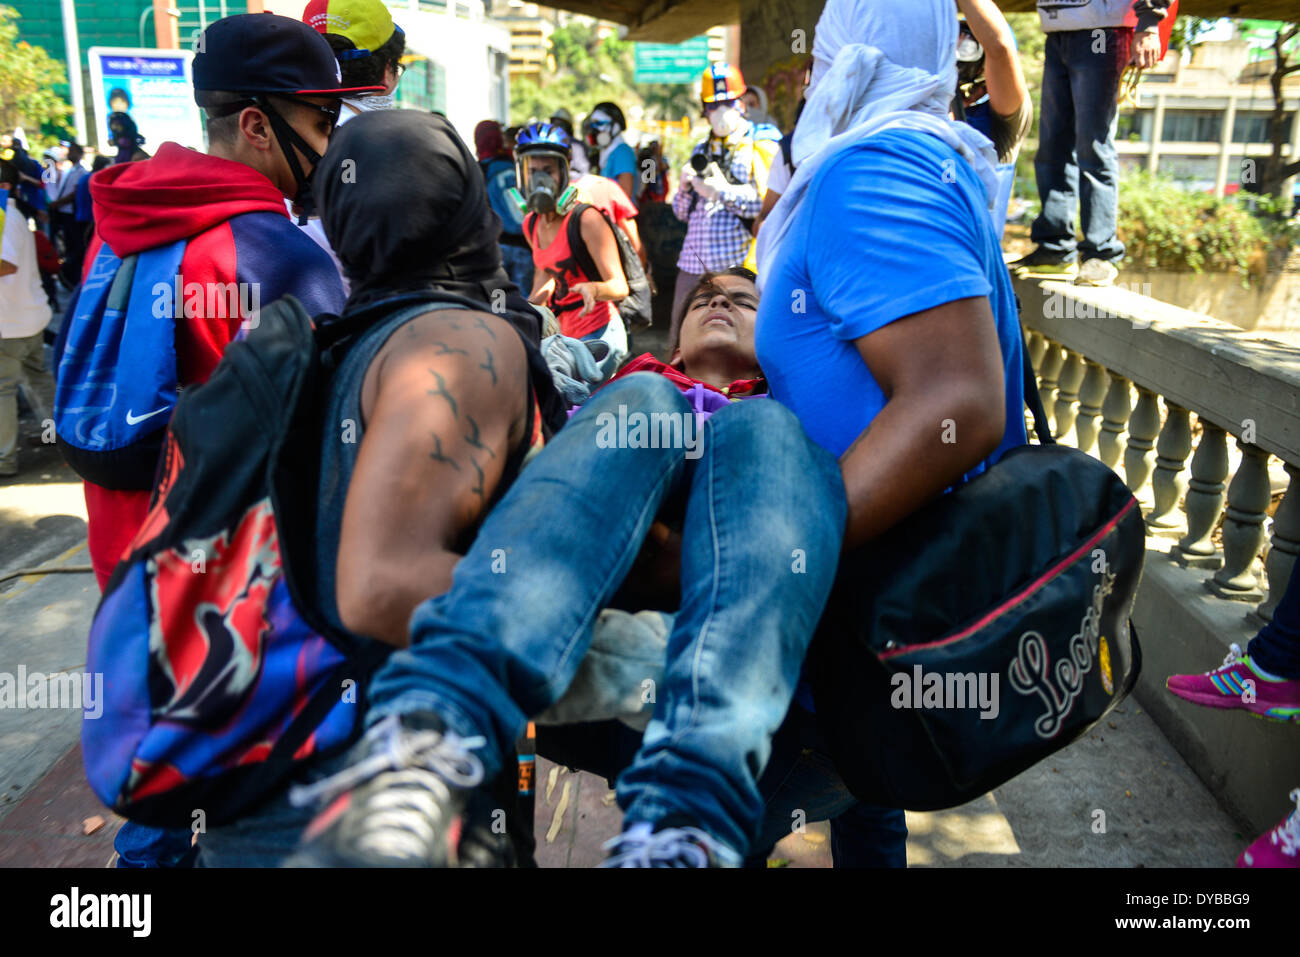 Caracas, Venezuela. 12th Apr, 2014. Demonstrators carry an injured person during an anti-government protest in Las Mercedes, Caracas, Venezuela, on April 12, 2014. Credit:  Carlos Becerra/Xinhua/Alamy Live News Stock Photo